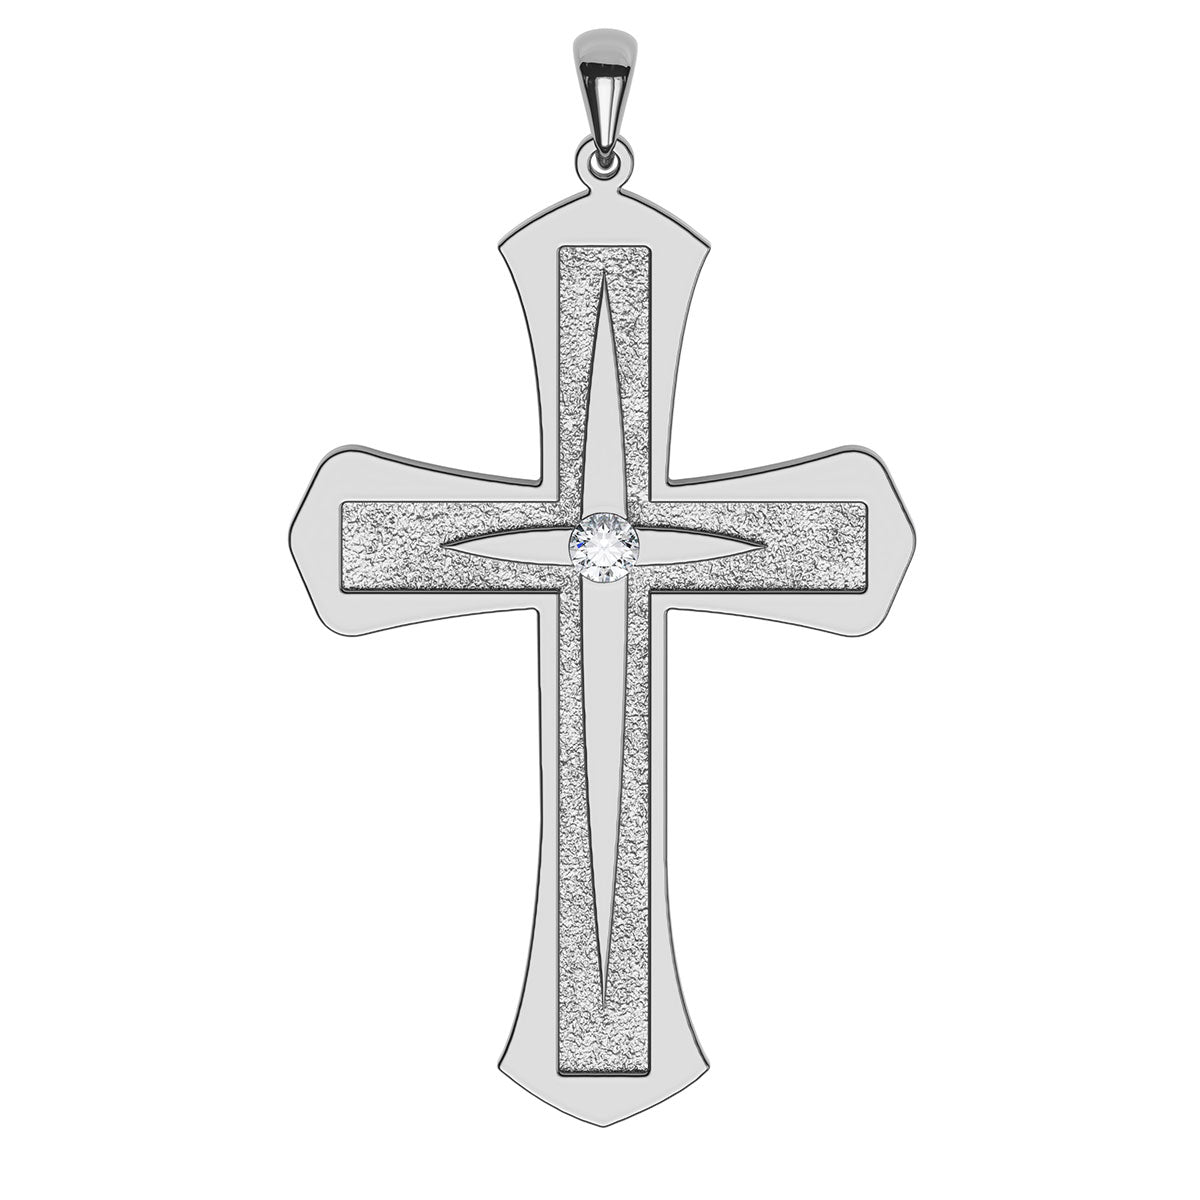 Engraved Leveled Cross with Stone